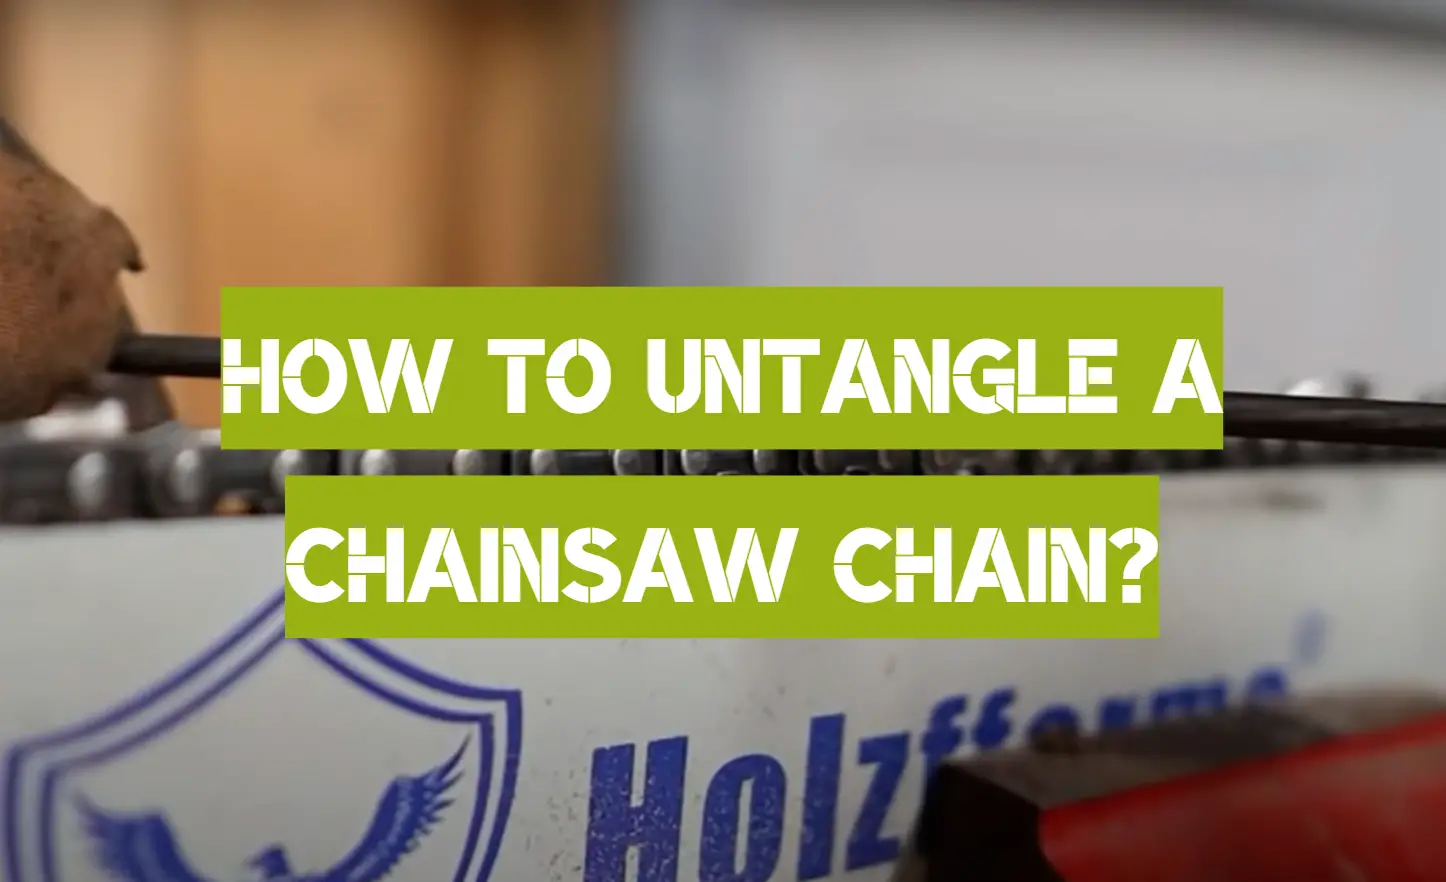 How to Untangle a Chainsaw Chain?